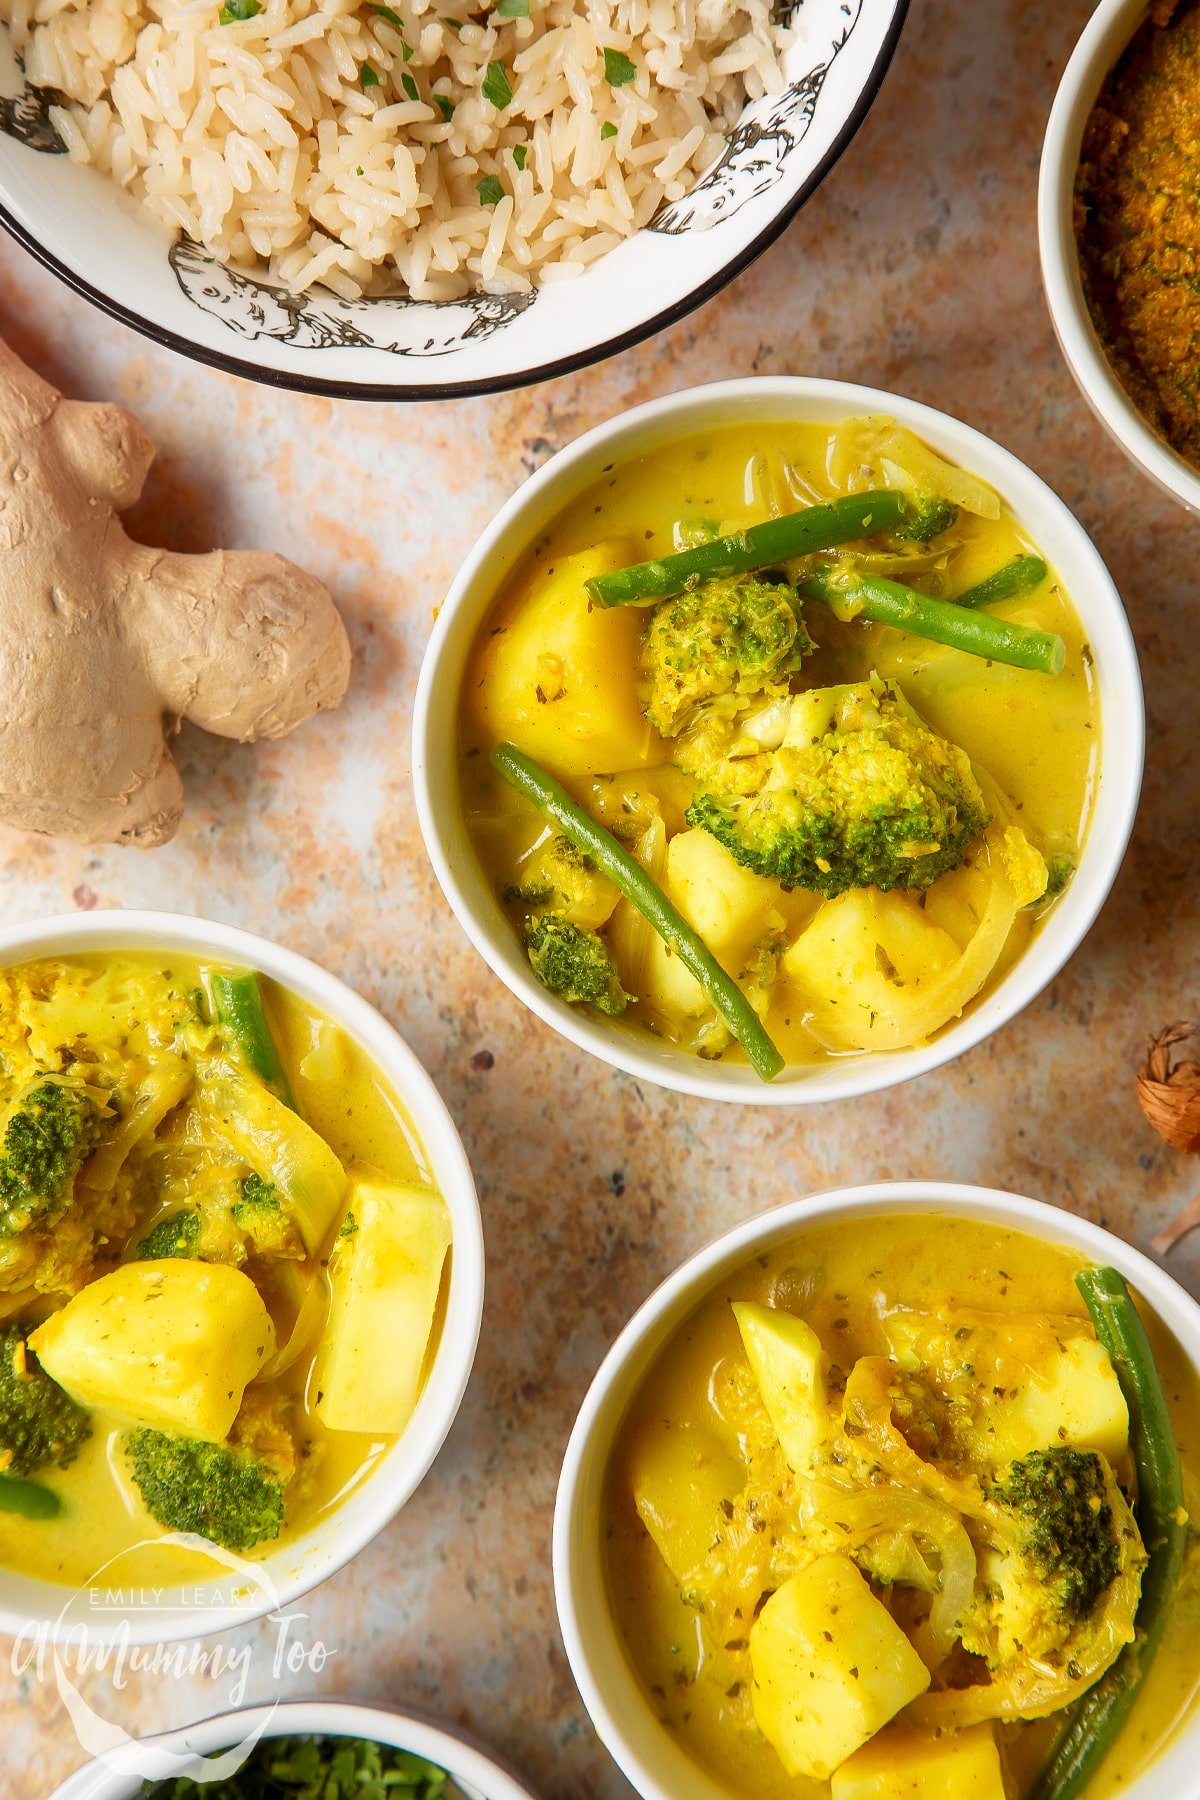 Vegetarian yellow curry with broccoli, potato and green beans, served to small white bowls. A bowl of rice is also shown.